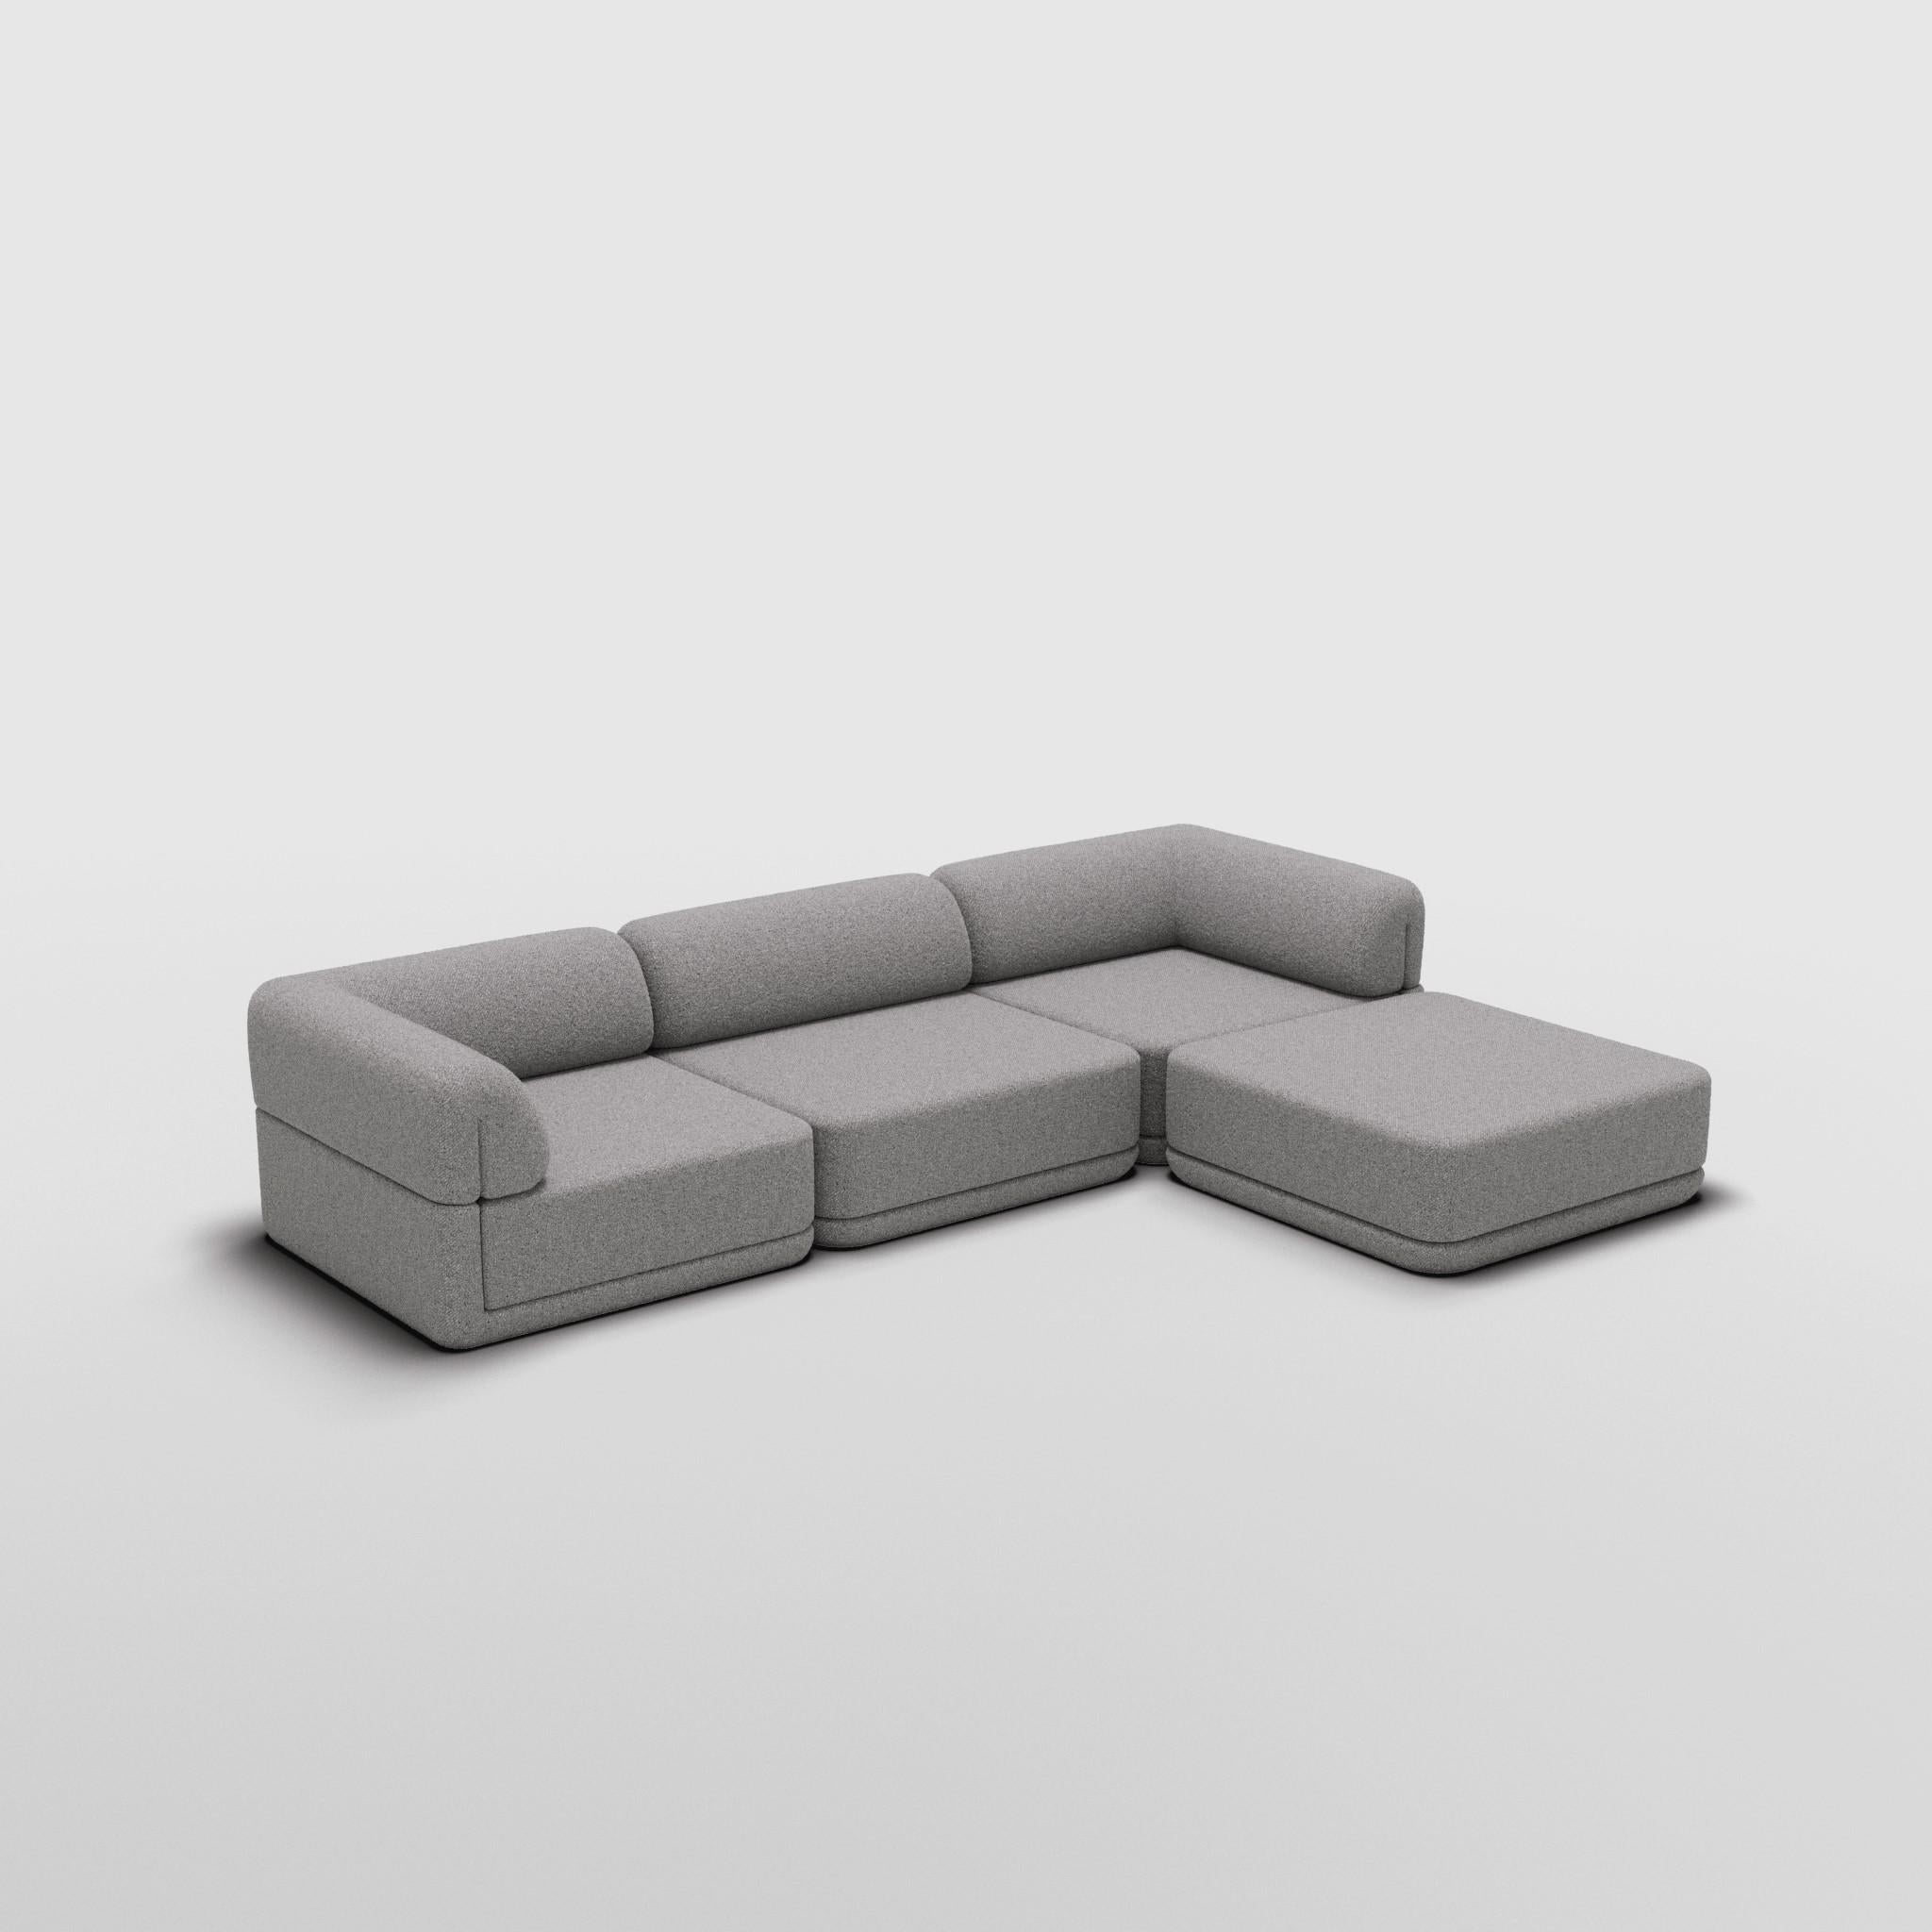 The Cube Sofa - Sofa Lounge with Ottoman For Sale 1